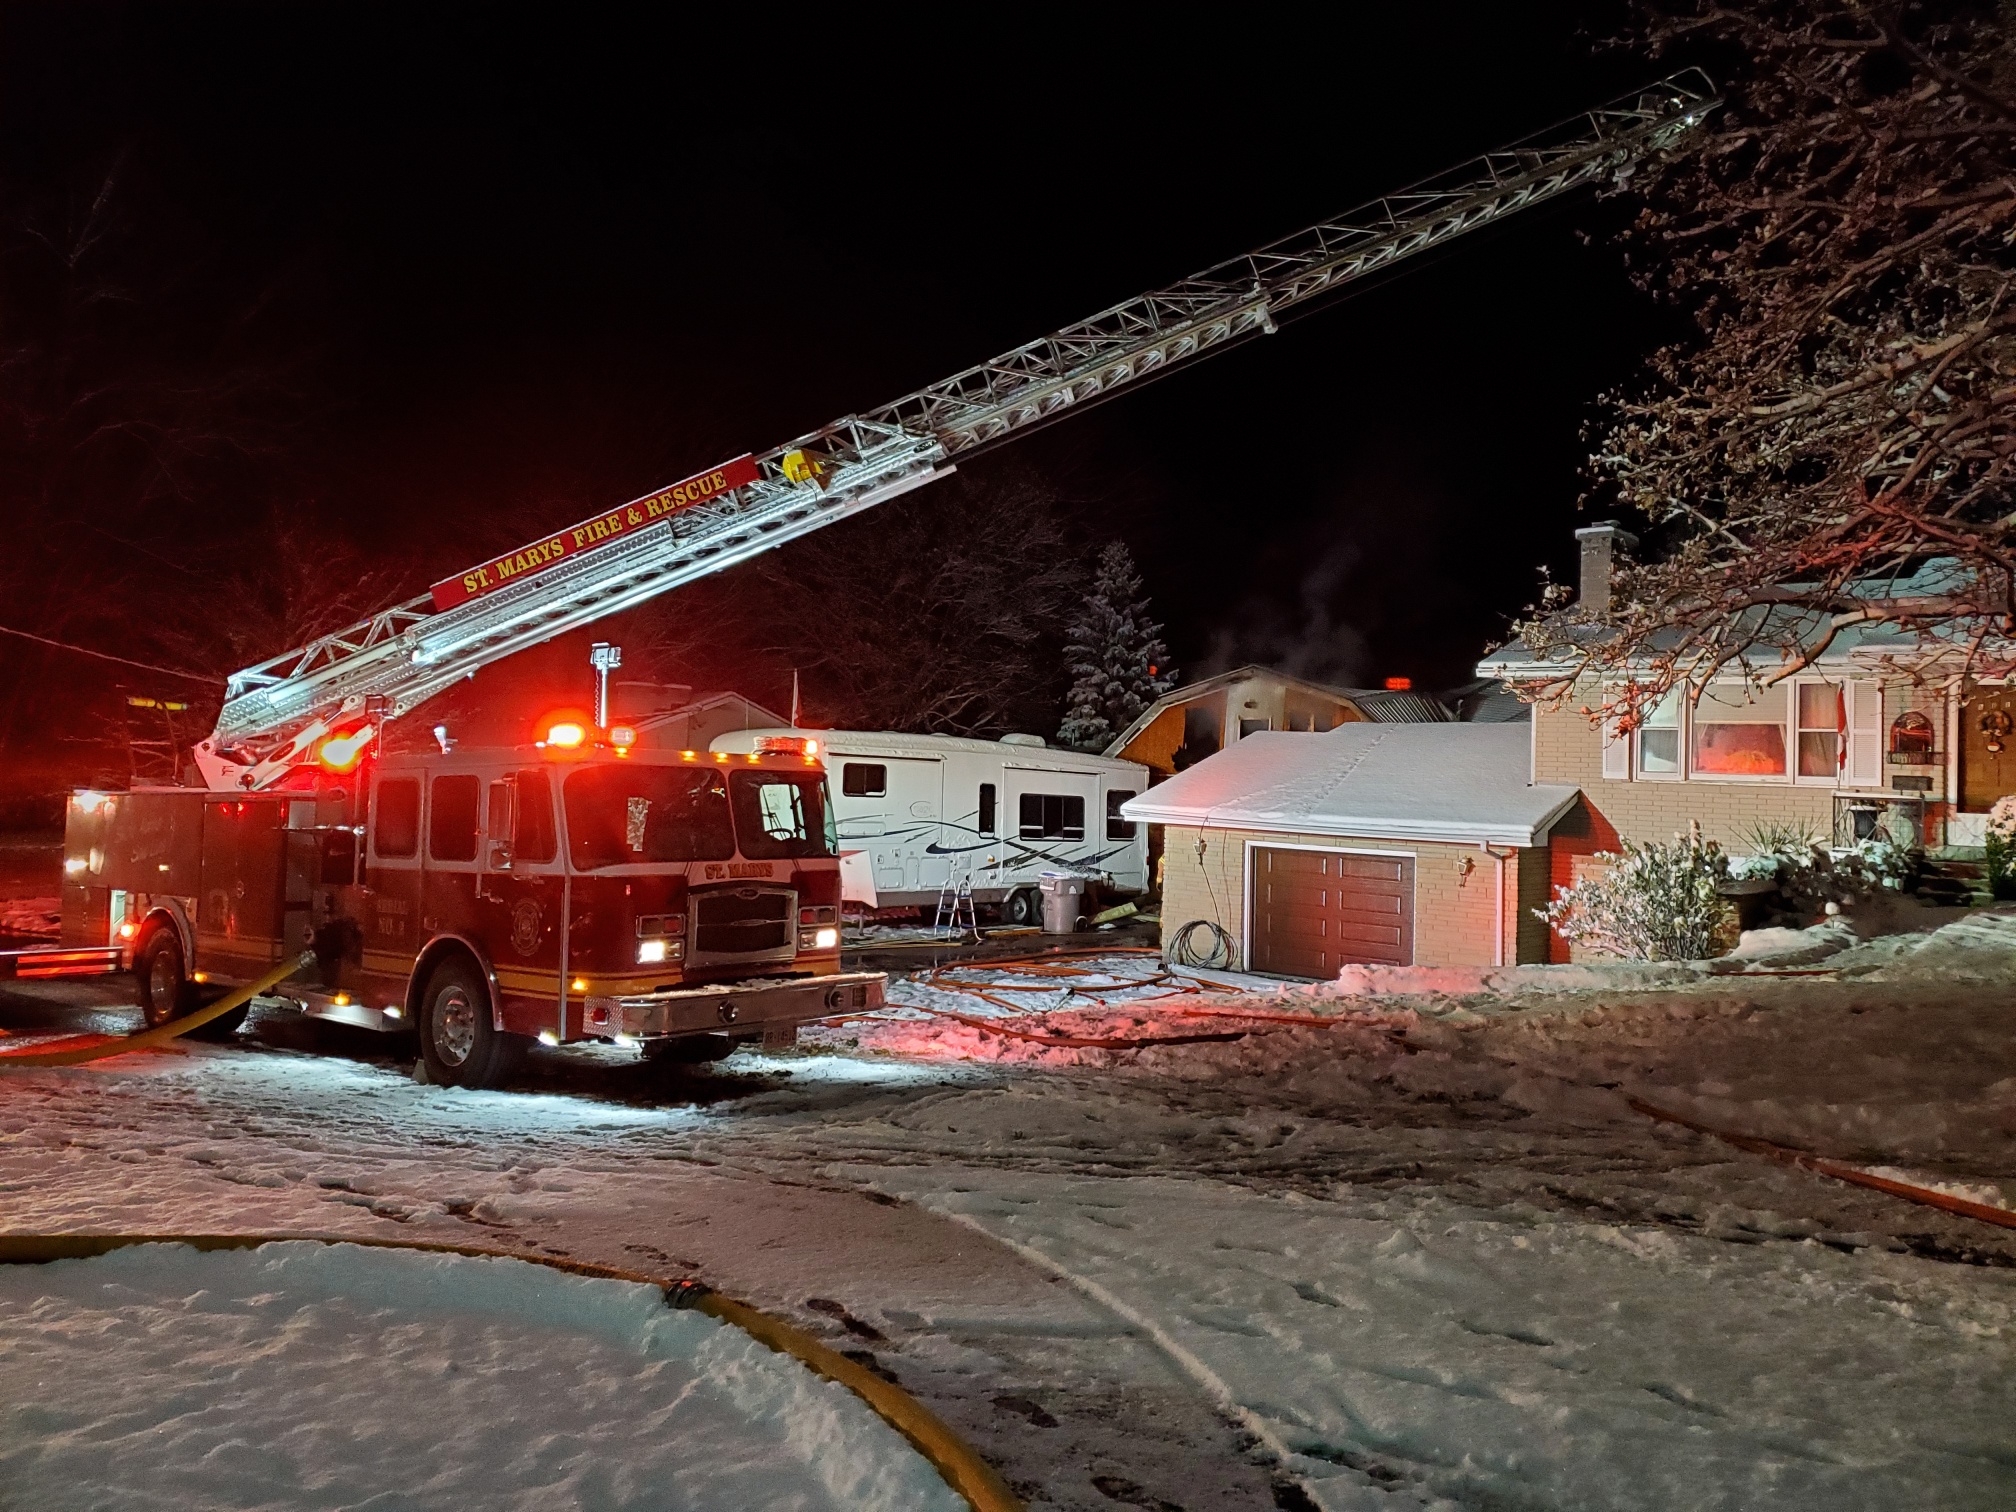 Ladder truck in use 2019